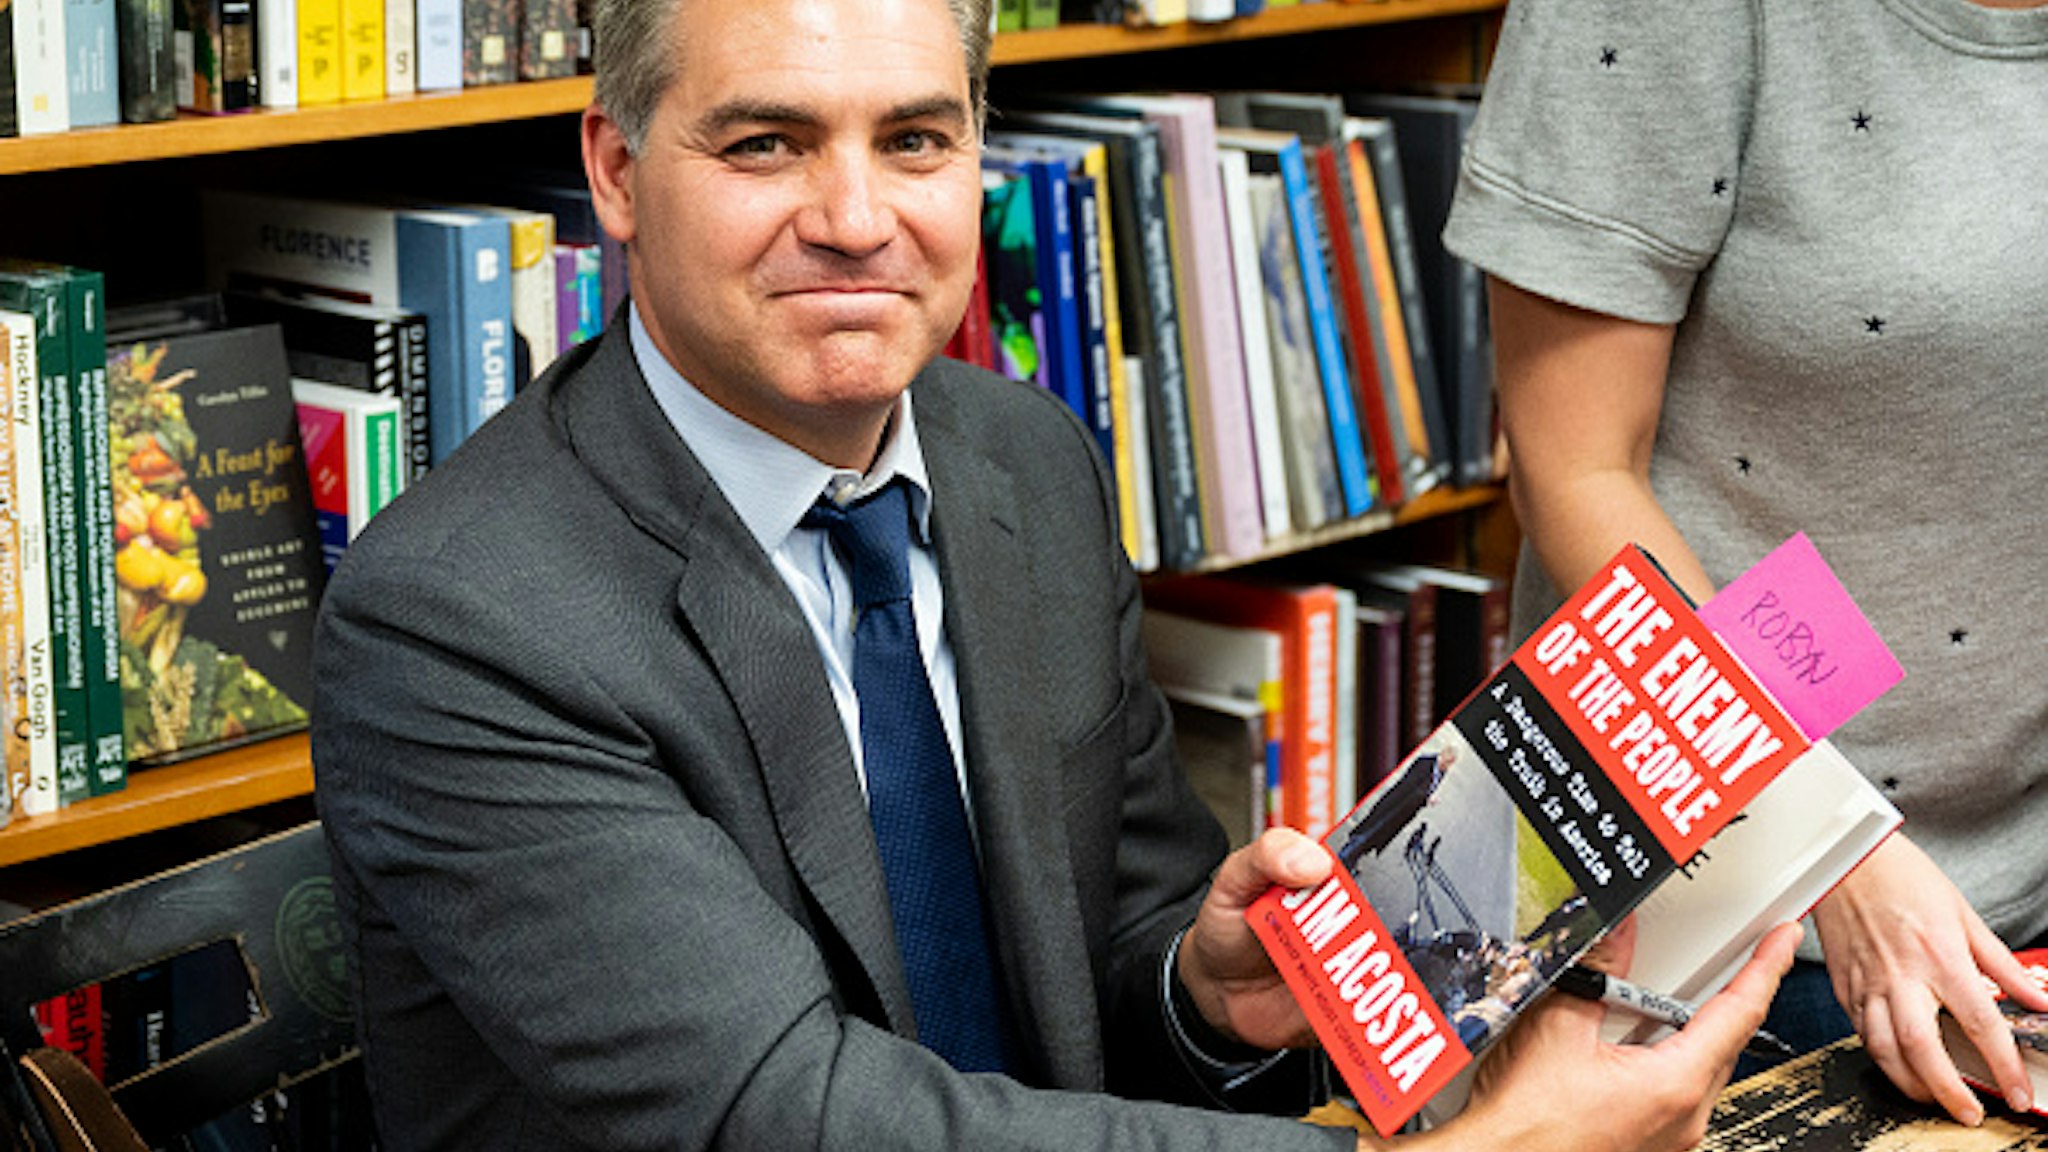 WASHINGTON, D C , UNITED STATES - 2019/06/18: Jim Acosta holds his book "The Enemy of the People: A Dangerous Time to Tell the Truth in America" at the Politics and Prose bookstore in Washington, DC.